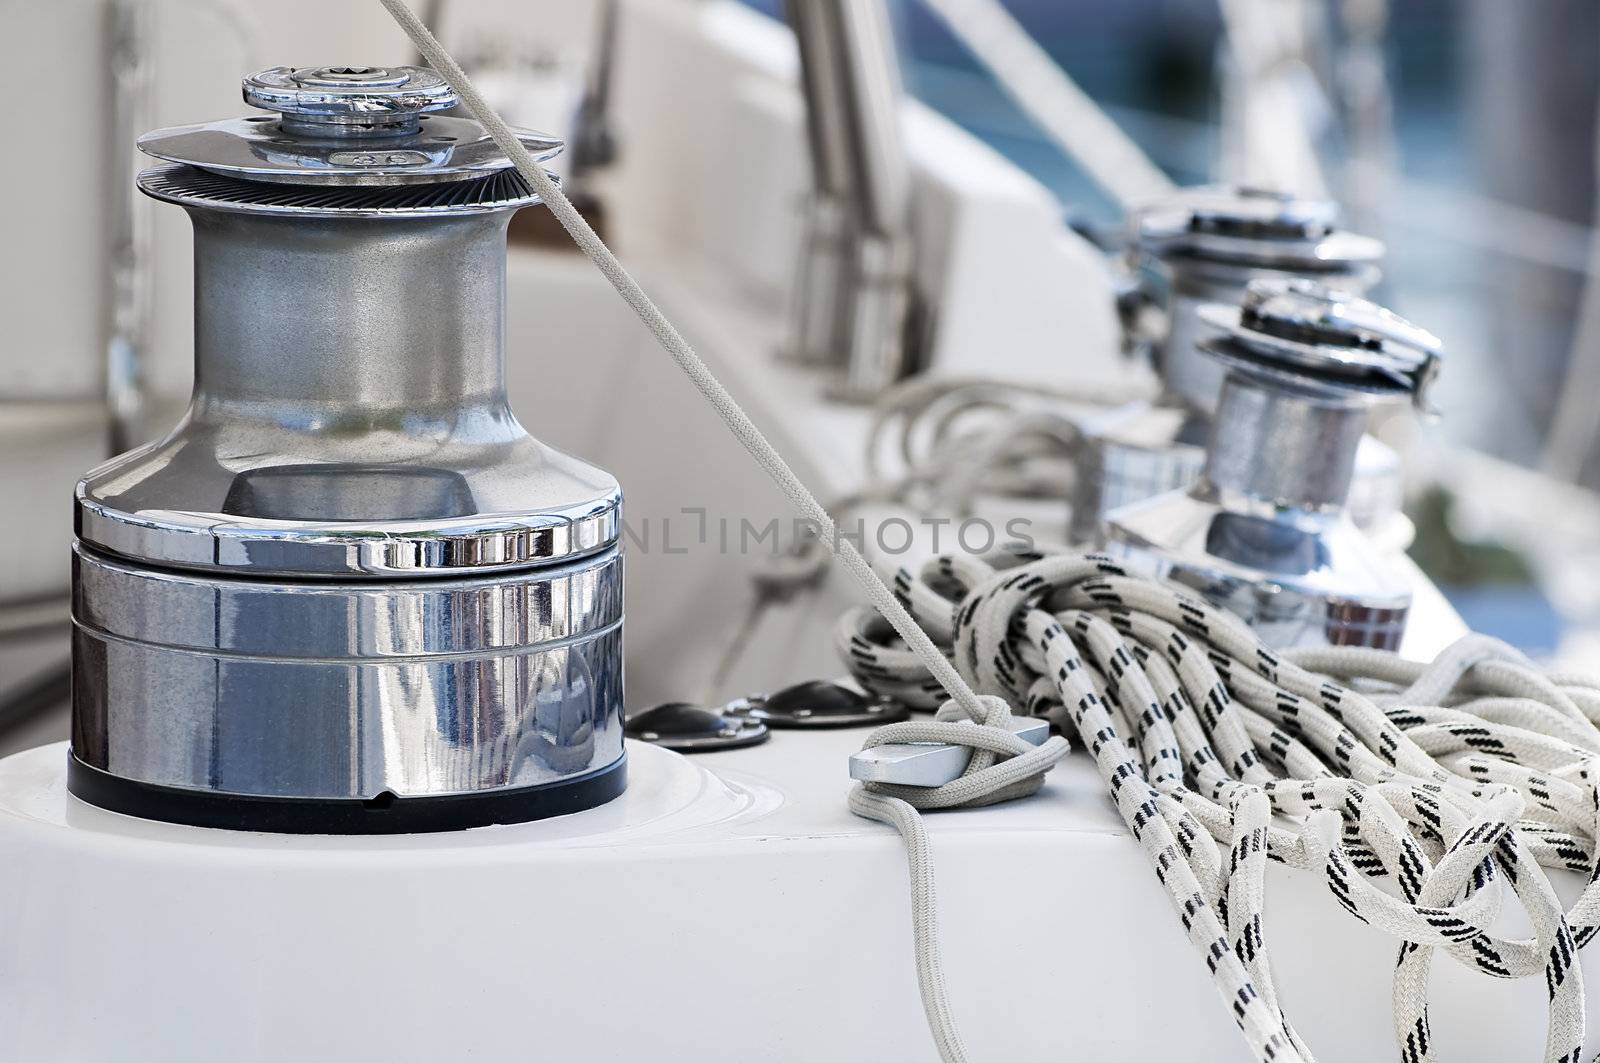 Winches and ropes on a sailboat deck